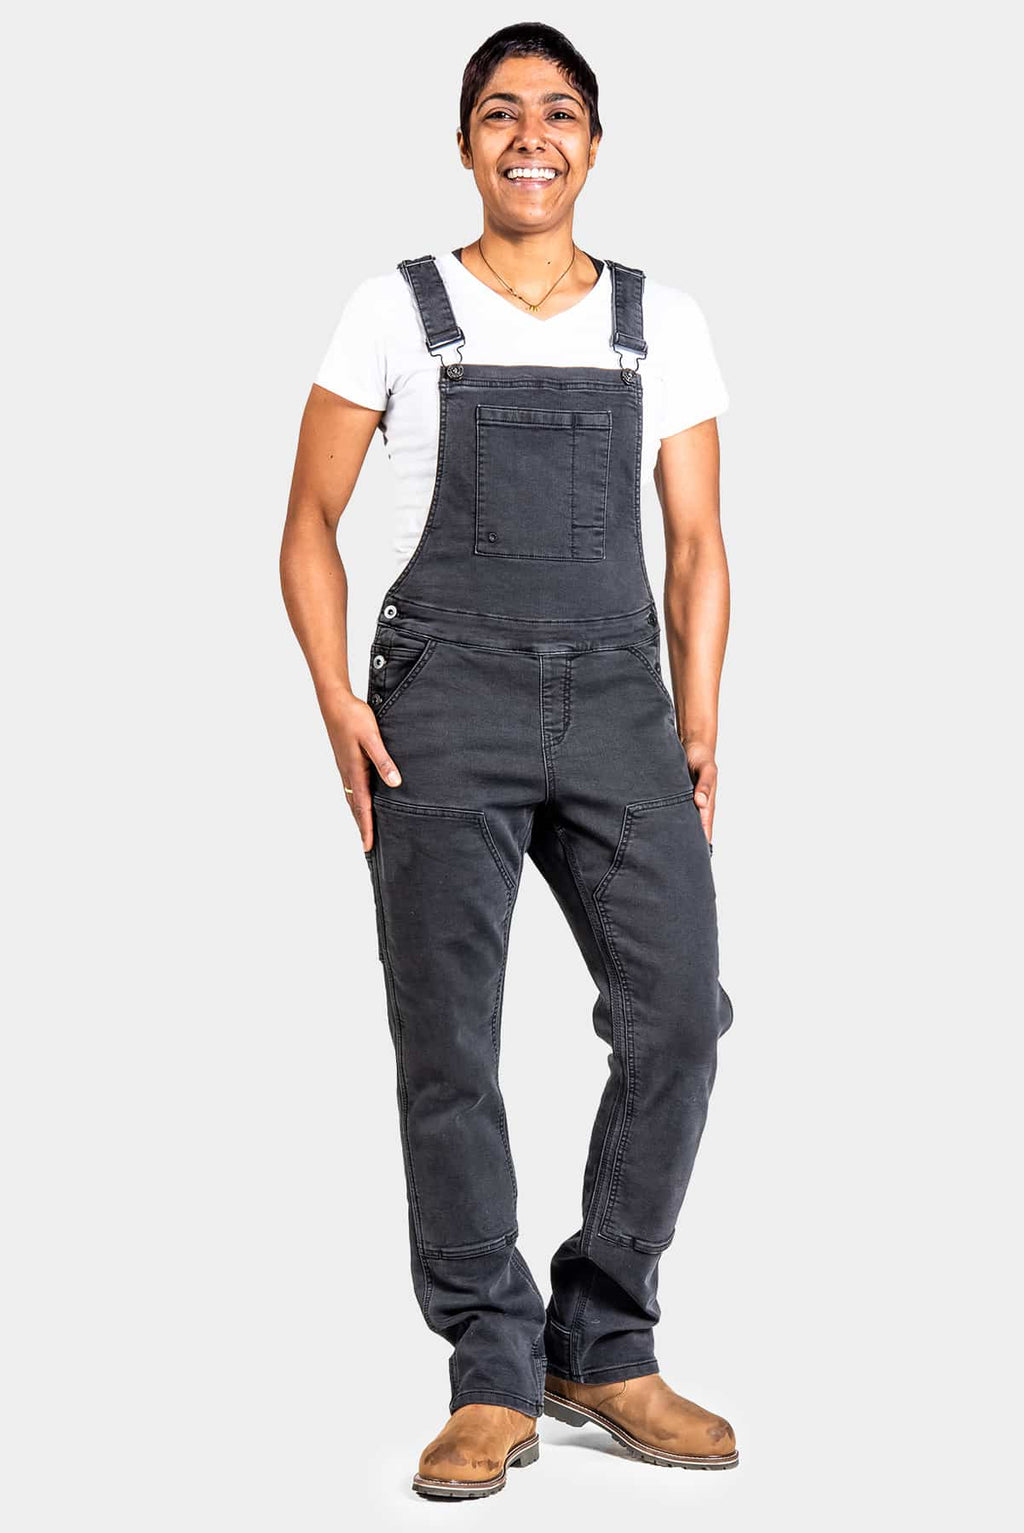 Freshley Overalls in Black Thermal Denim Work Pants Dovetail Workwear